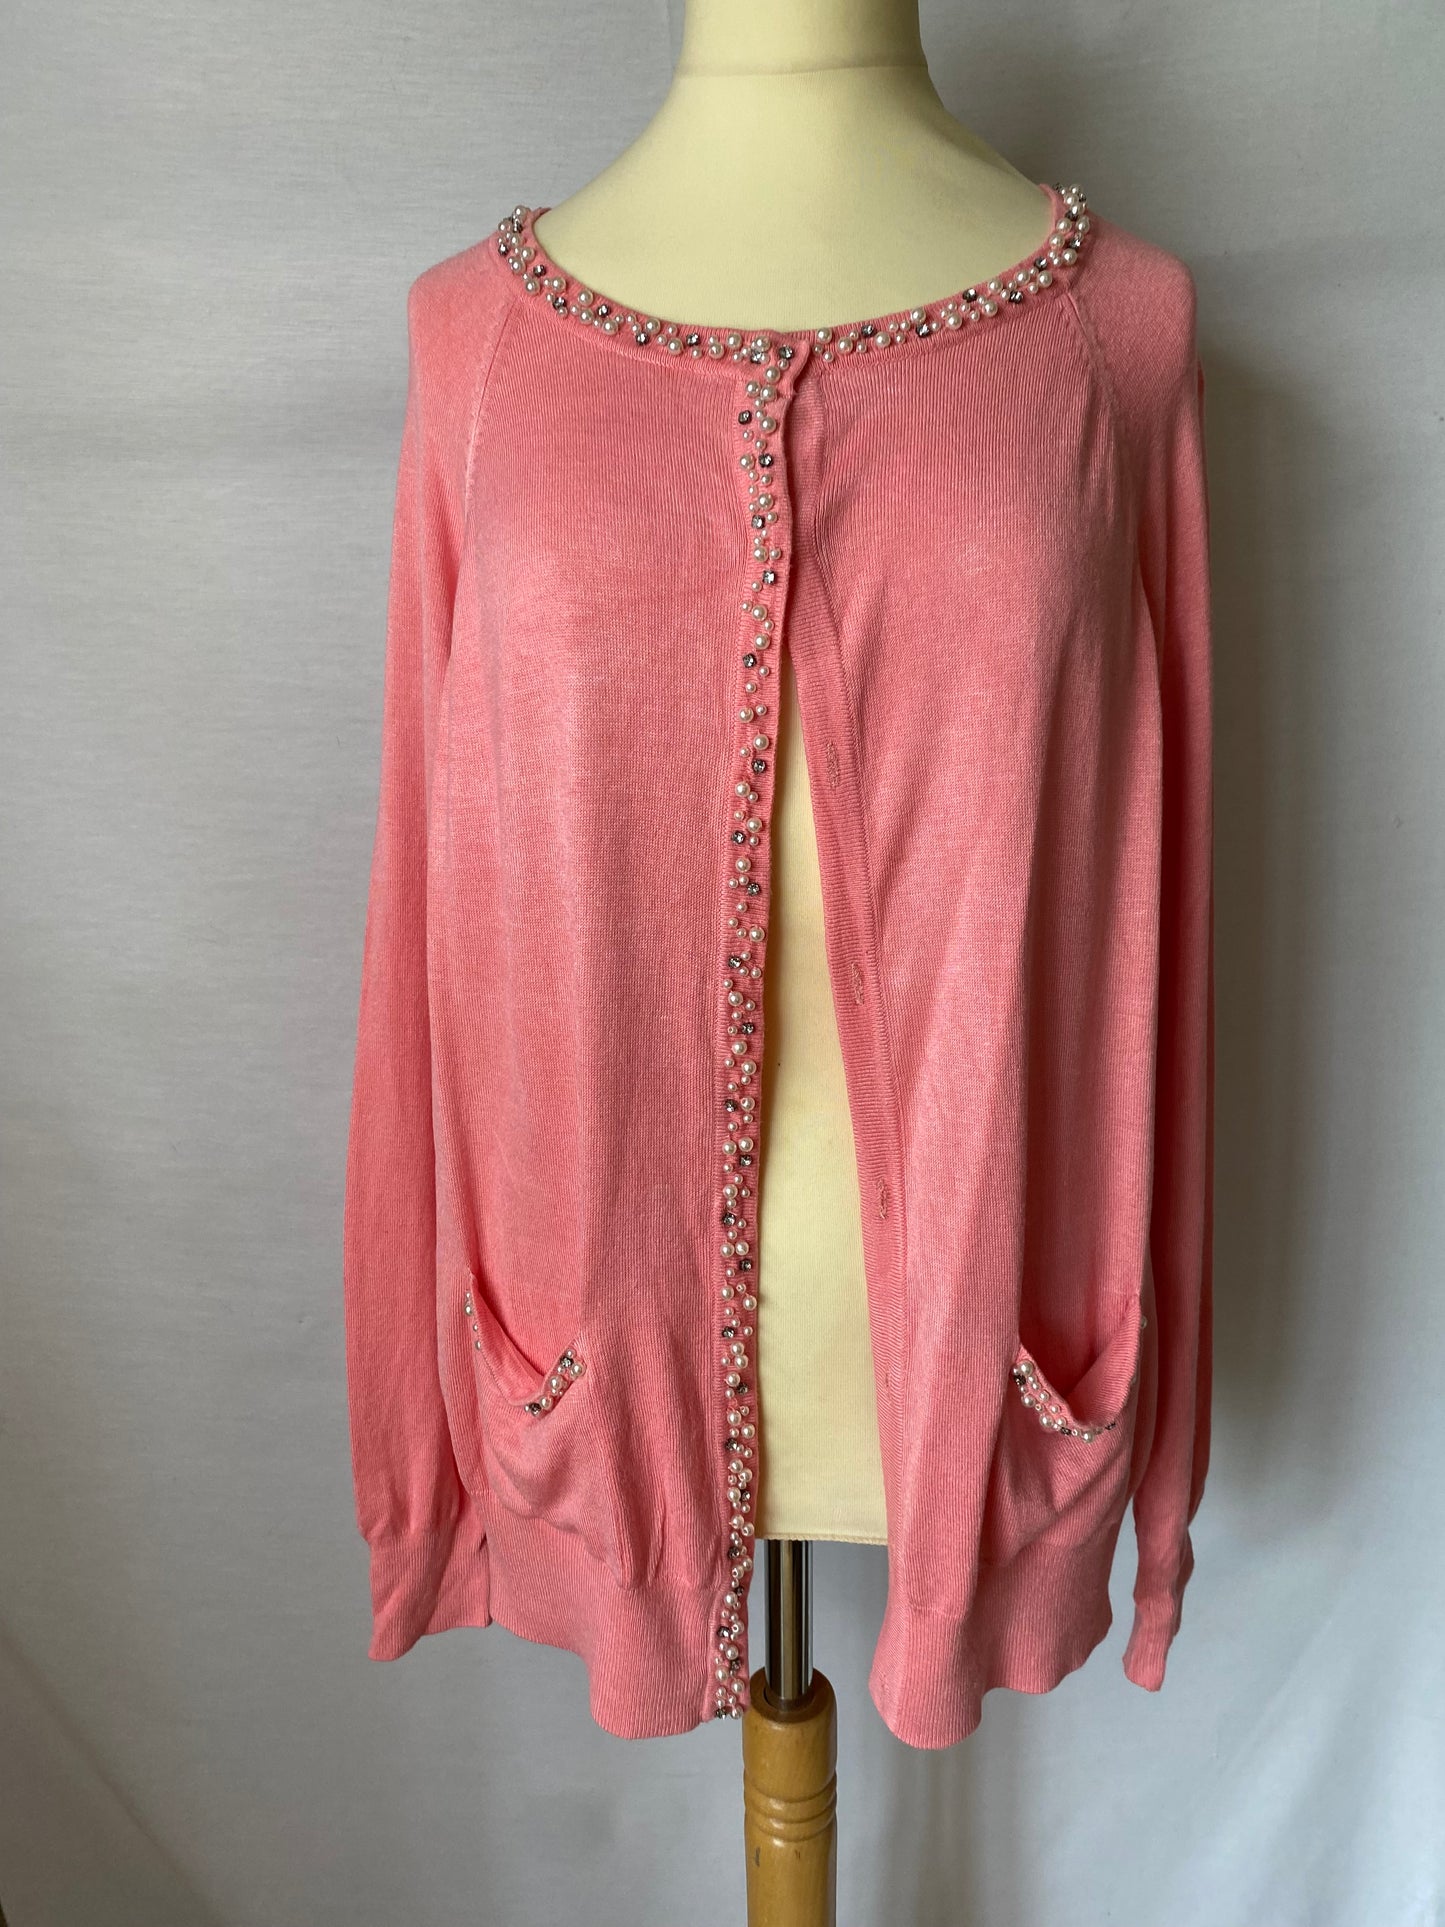 Atmosphere - 14 pink peach jewel trimmed cardigan with pockets